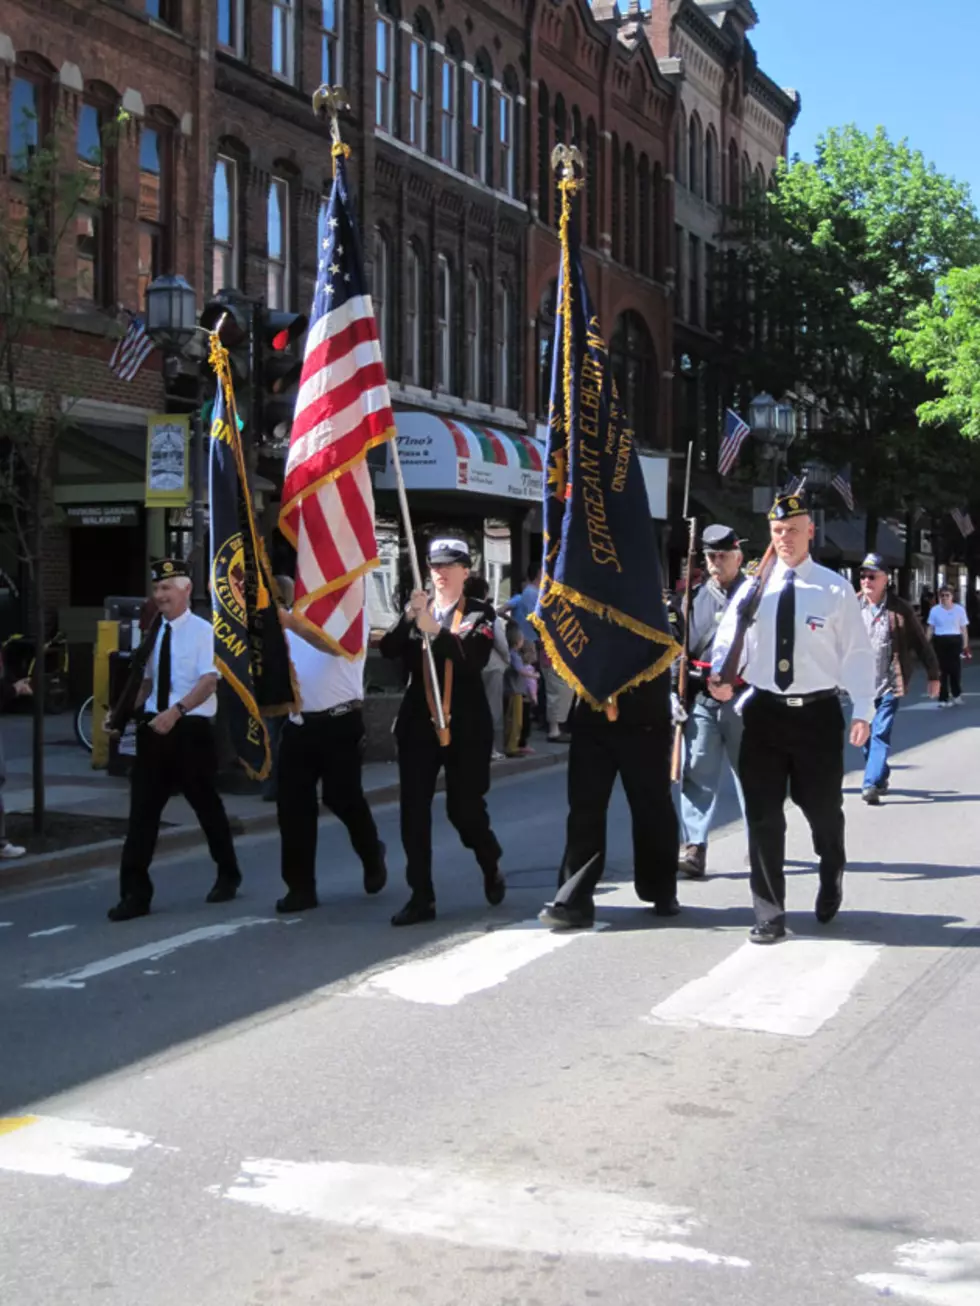 Oneonta, NY Remembers War Veterans With a Big Parade on Memorial Day [Photos]